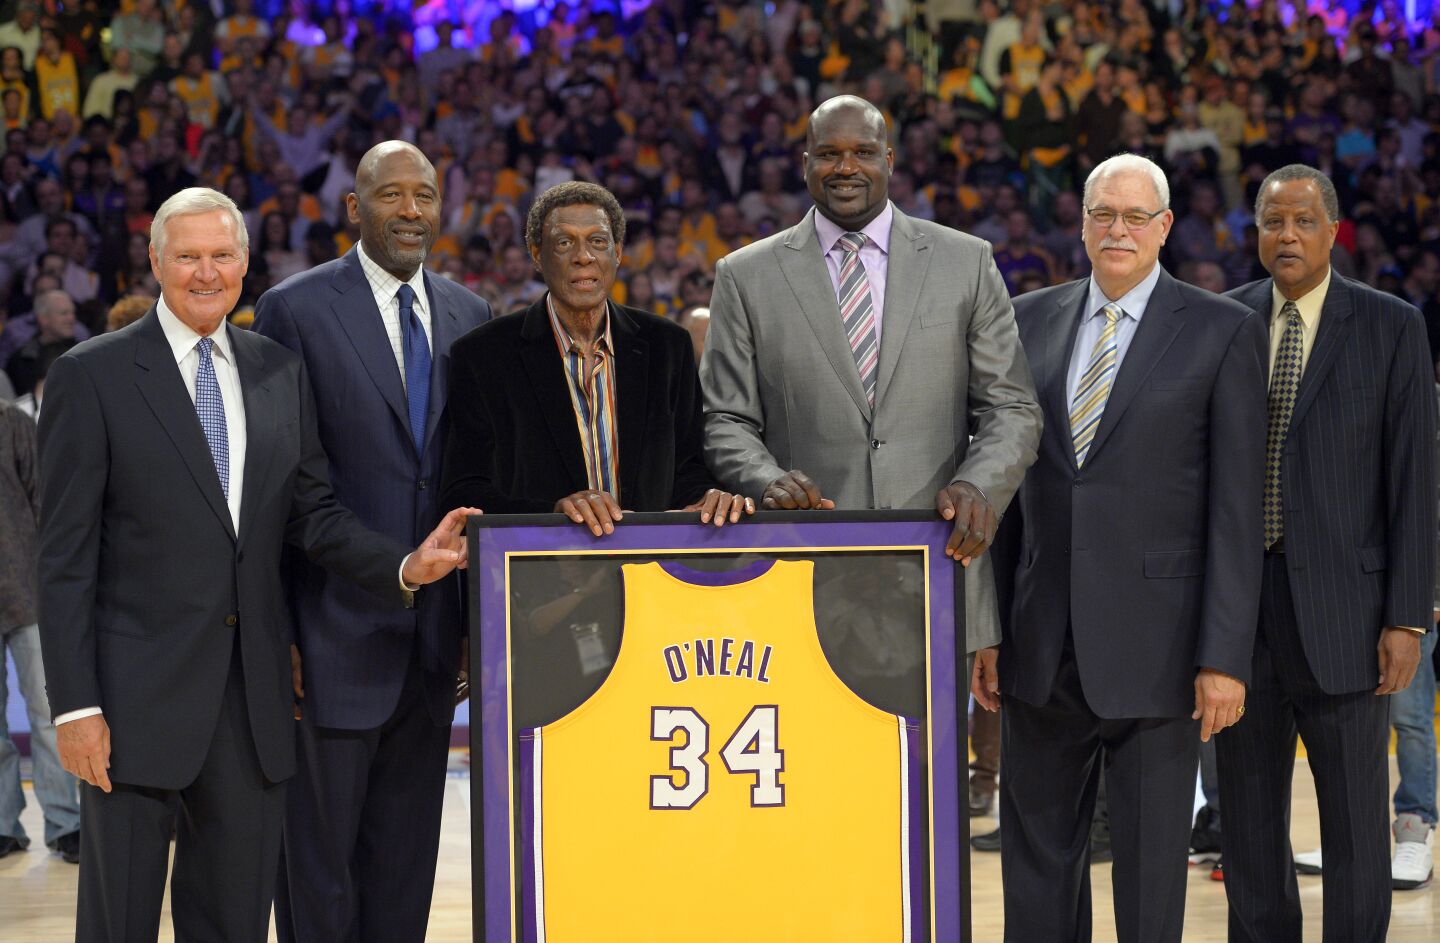 Former Los Angeles Lakers, from left, Jerry West, James Worthy, Elgin Baylor, Shaquille O'Neal, Jamaal Wilkes and former coach Phil Jackson pose as they retired his O'Neal's jersey during the half of the Lakers' NBA basketball game against the Dallas Mavericks, Tuesday, April 2, 2013, in Los Angeles.